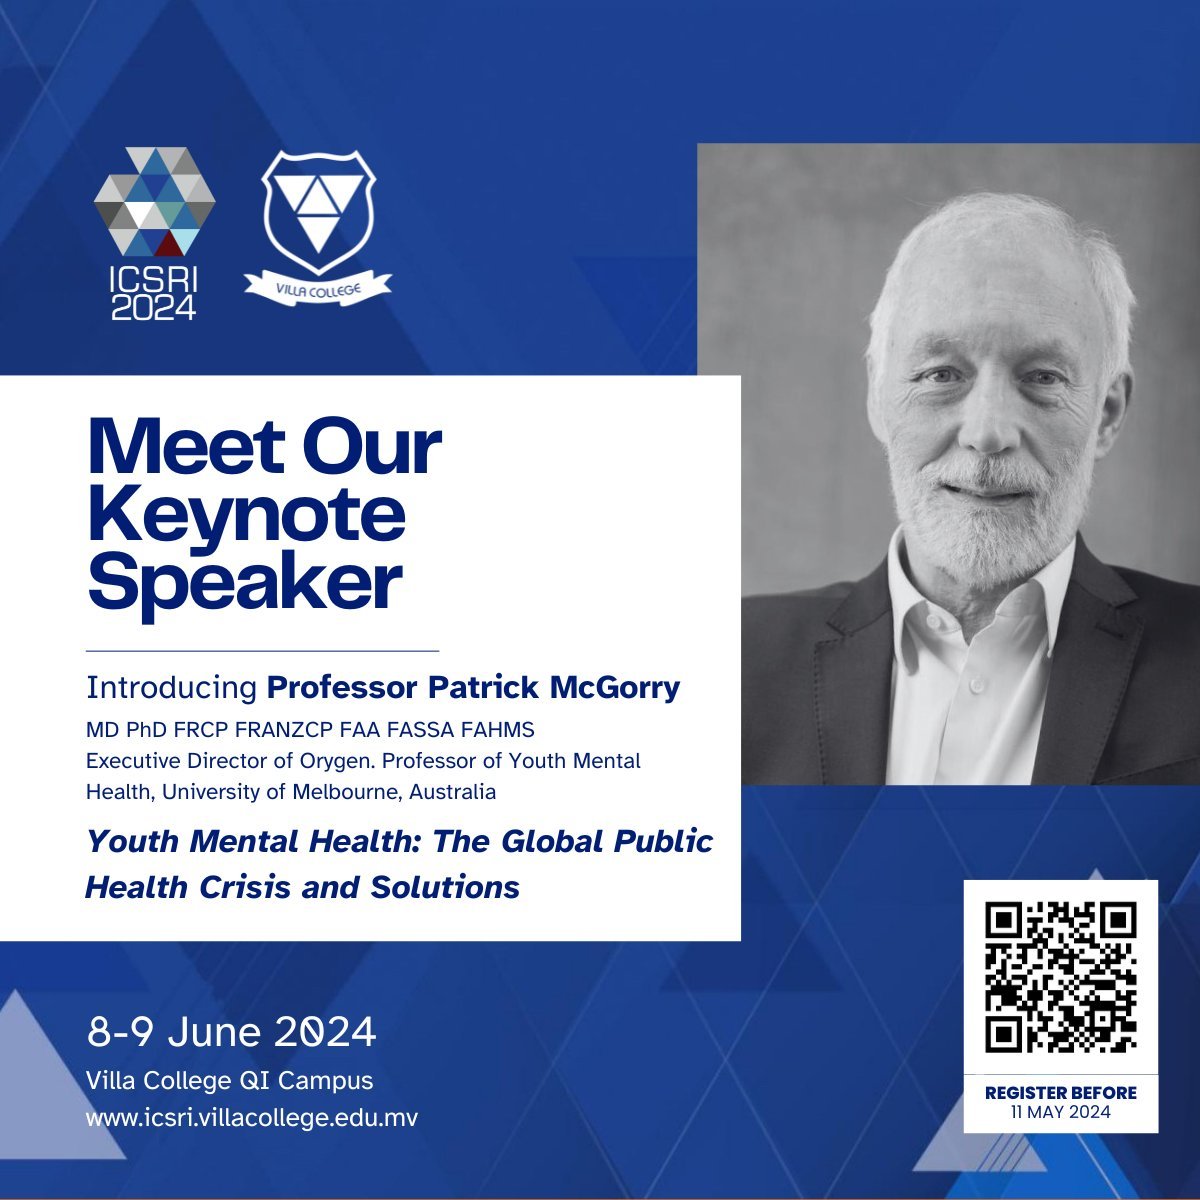 Introducing #ICSRI2024 Keynote Speaker, Professor Patrick McGorry Professor Patrick McGorry is an Irish-born Australian psychiatrist known worldwide for his development and scaling up of early intervention, youth mental health services, mental health innovation, advocacy, and…